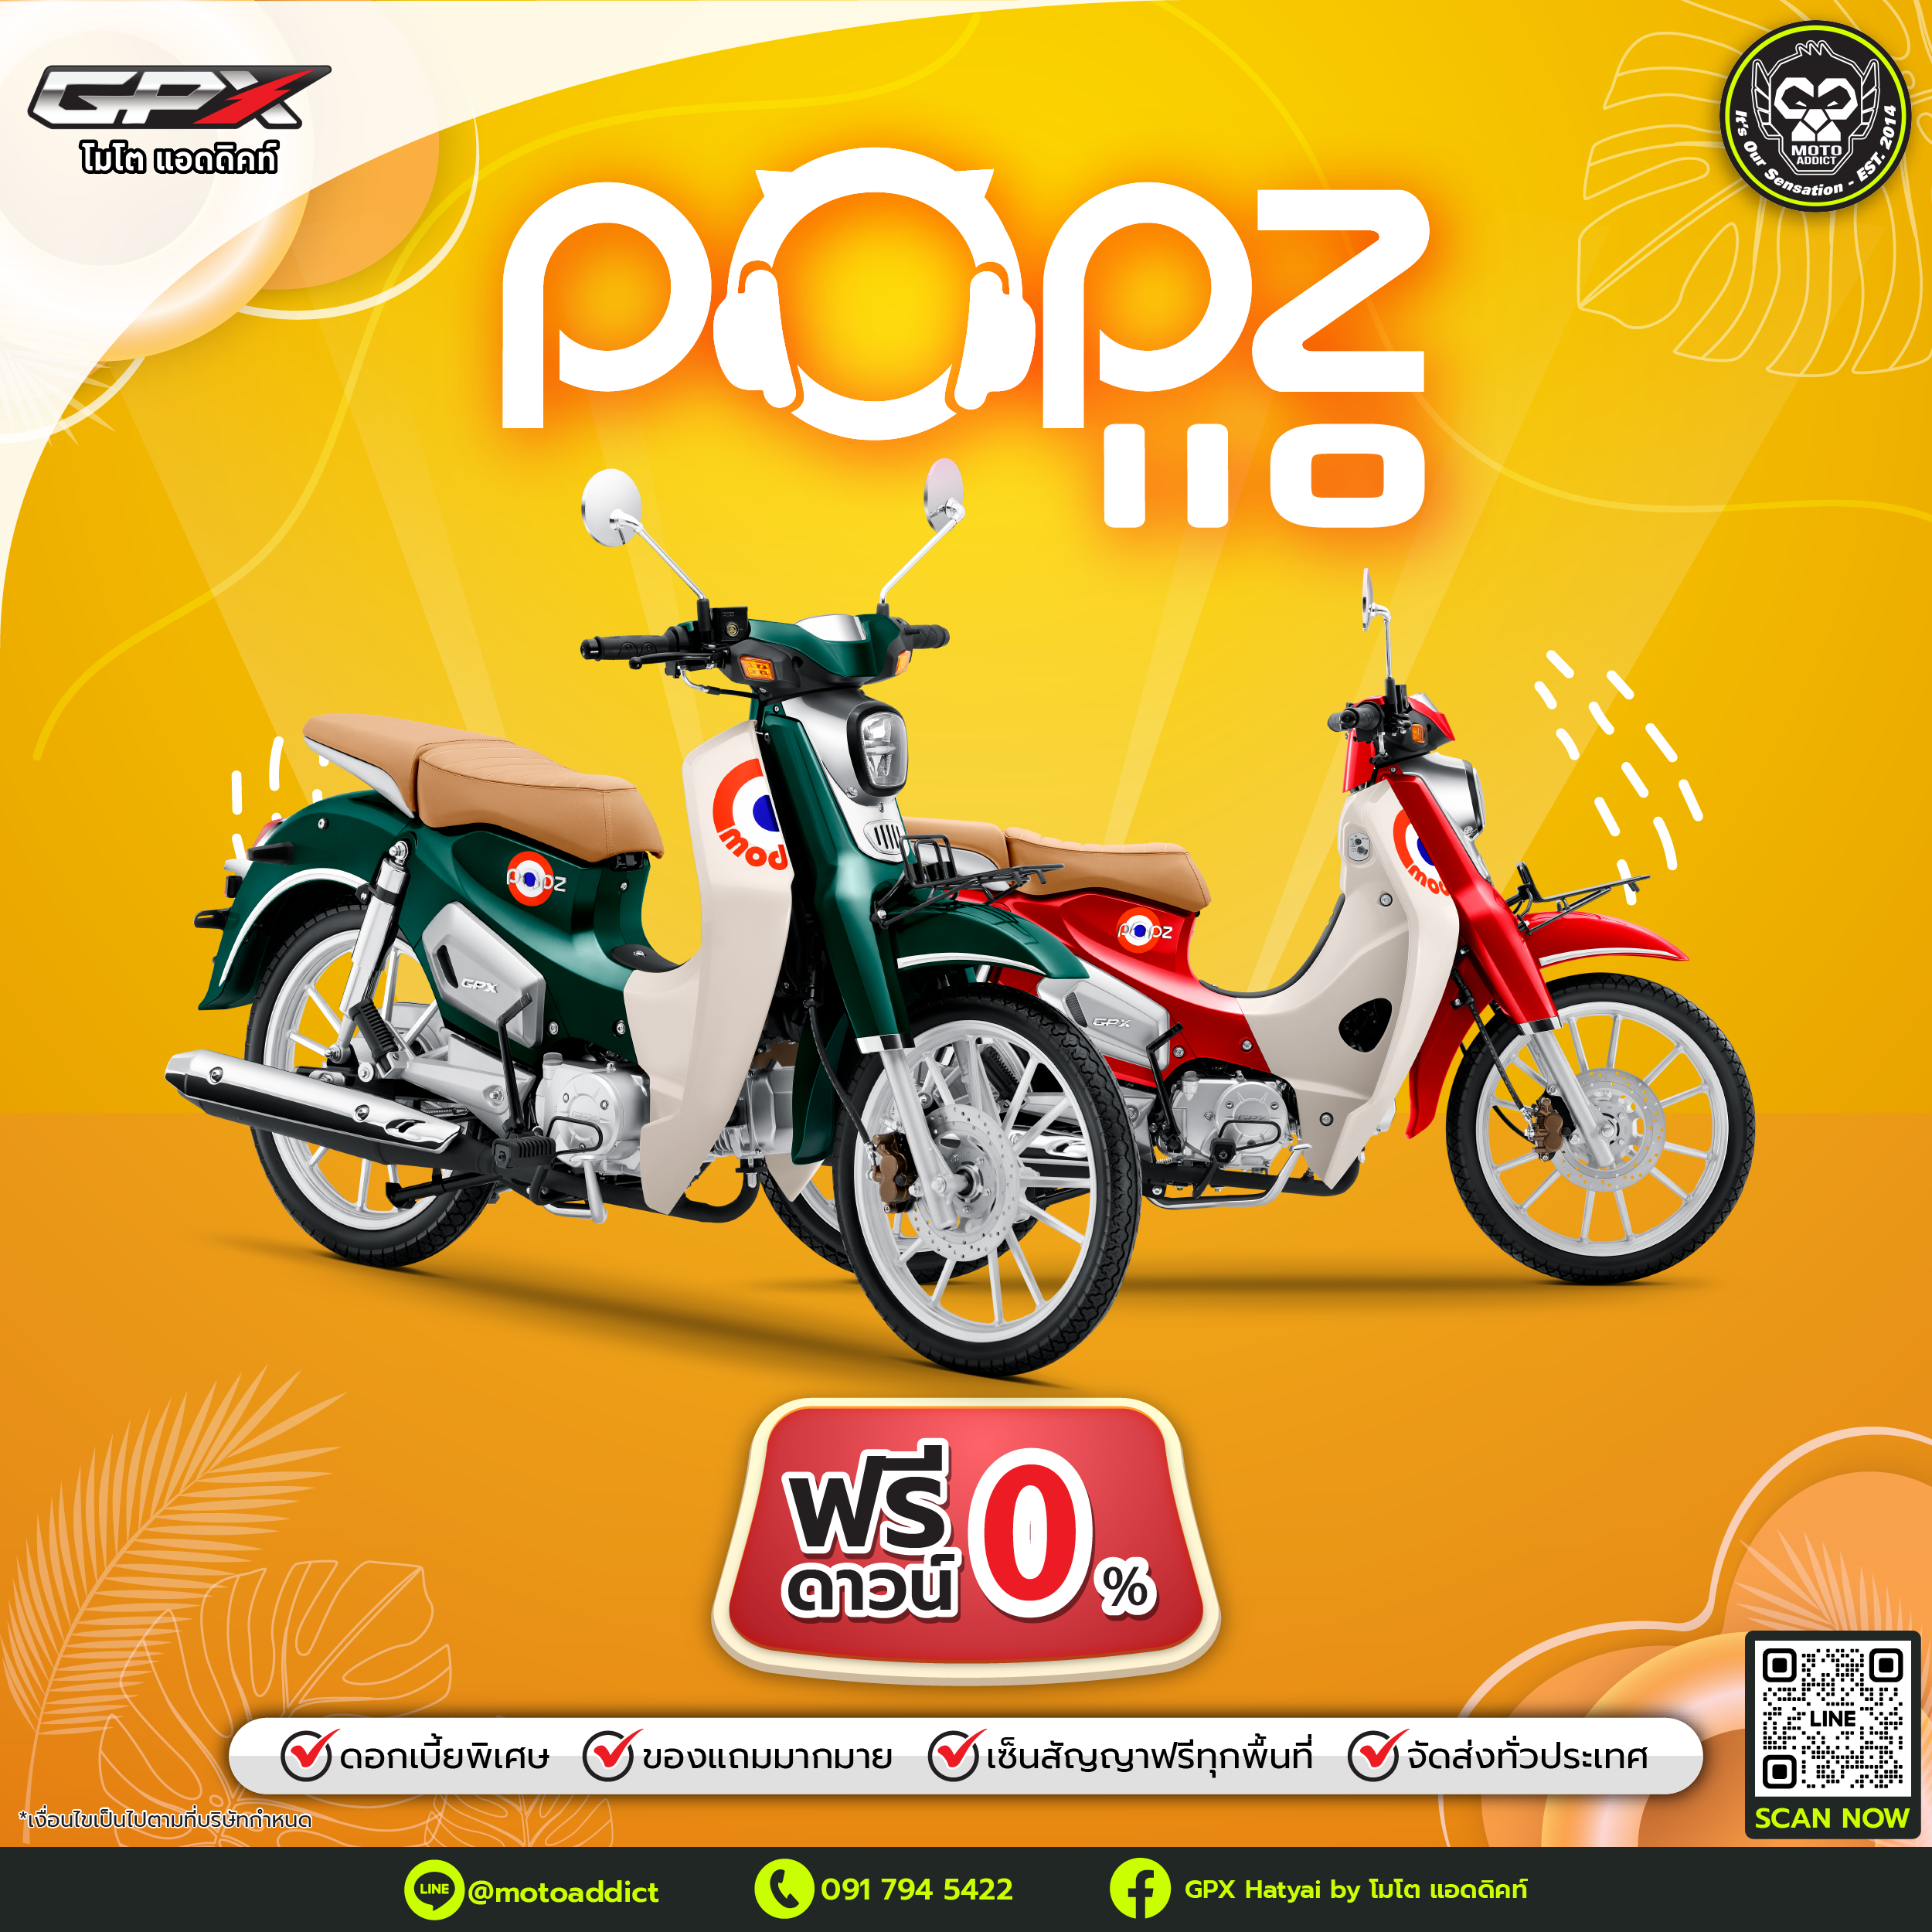 End of Summer Sales GPX POPZ 110